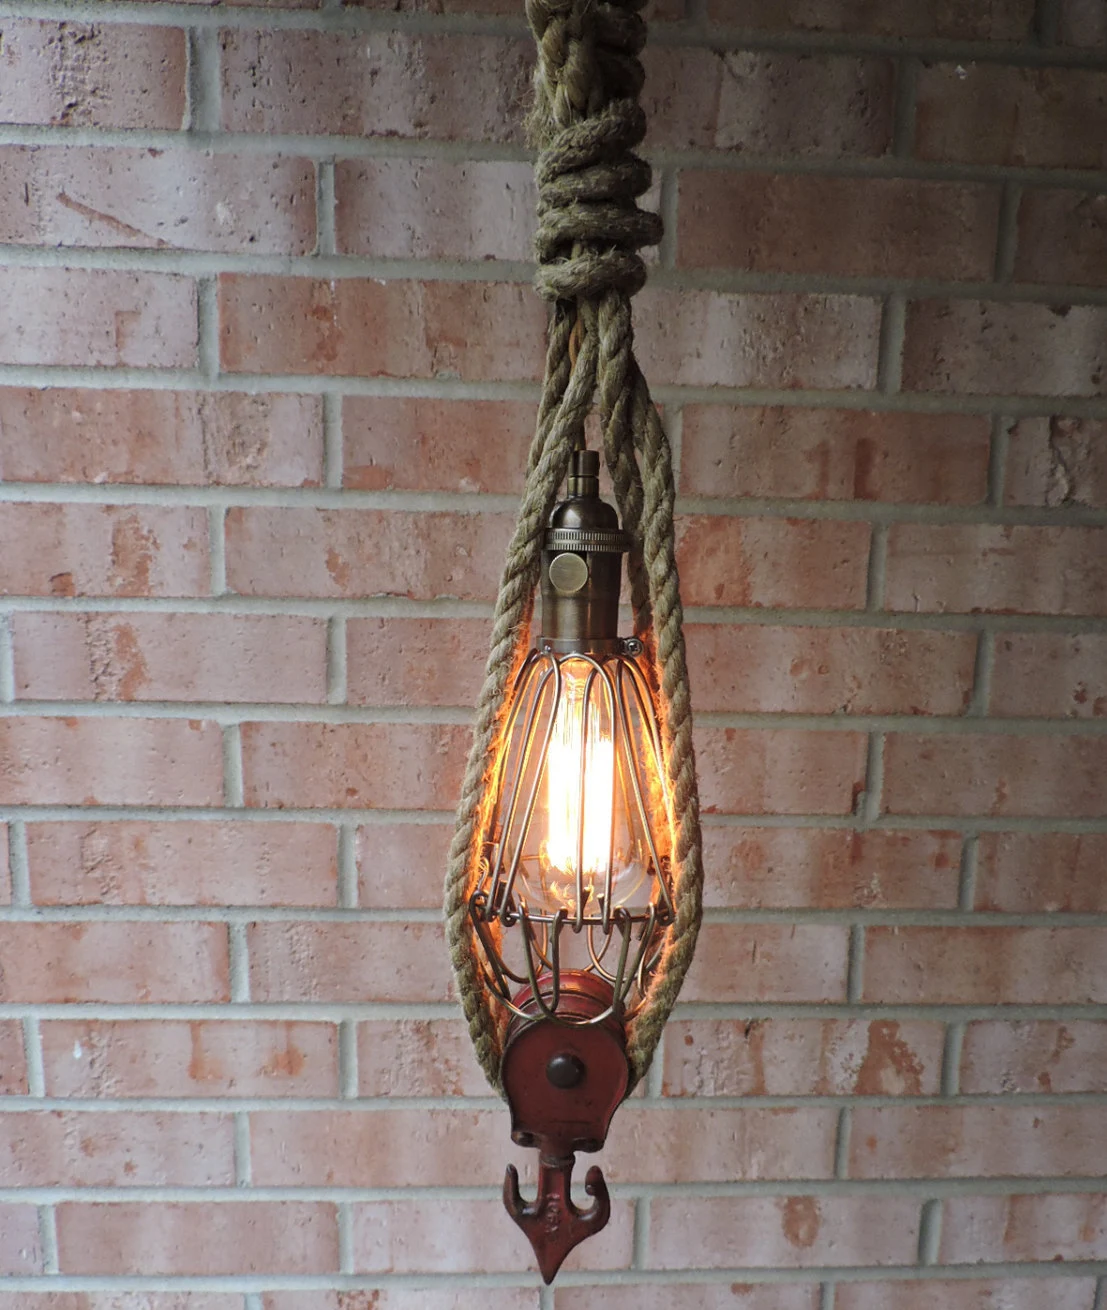 20 Unconventional Handmade Industrial Lighting Designs You Can Diy #021